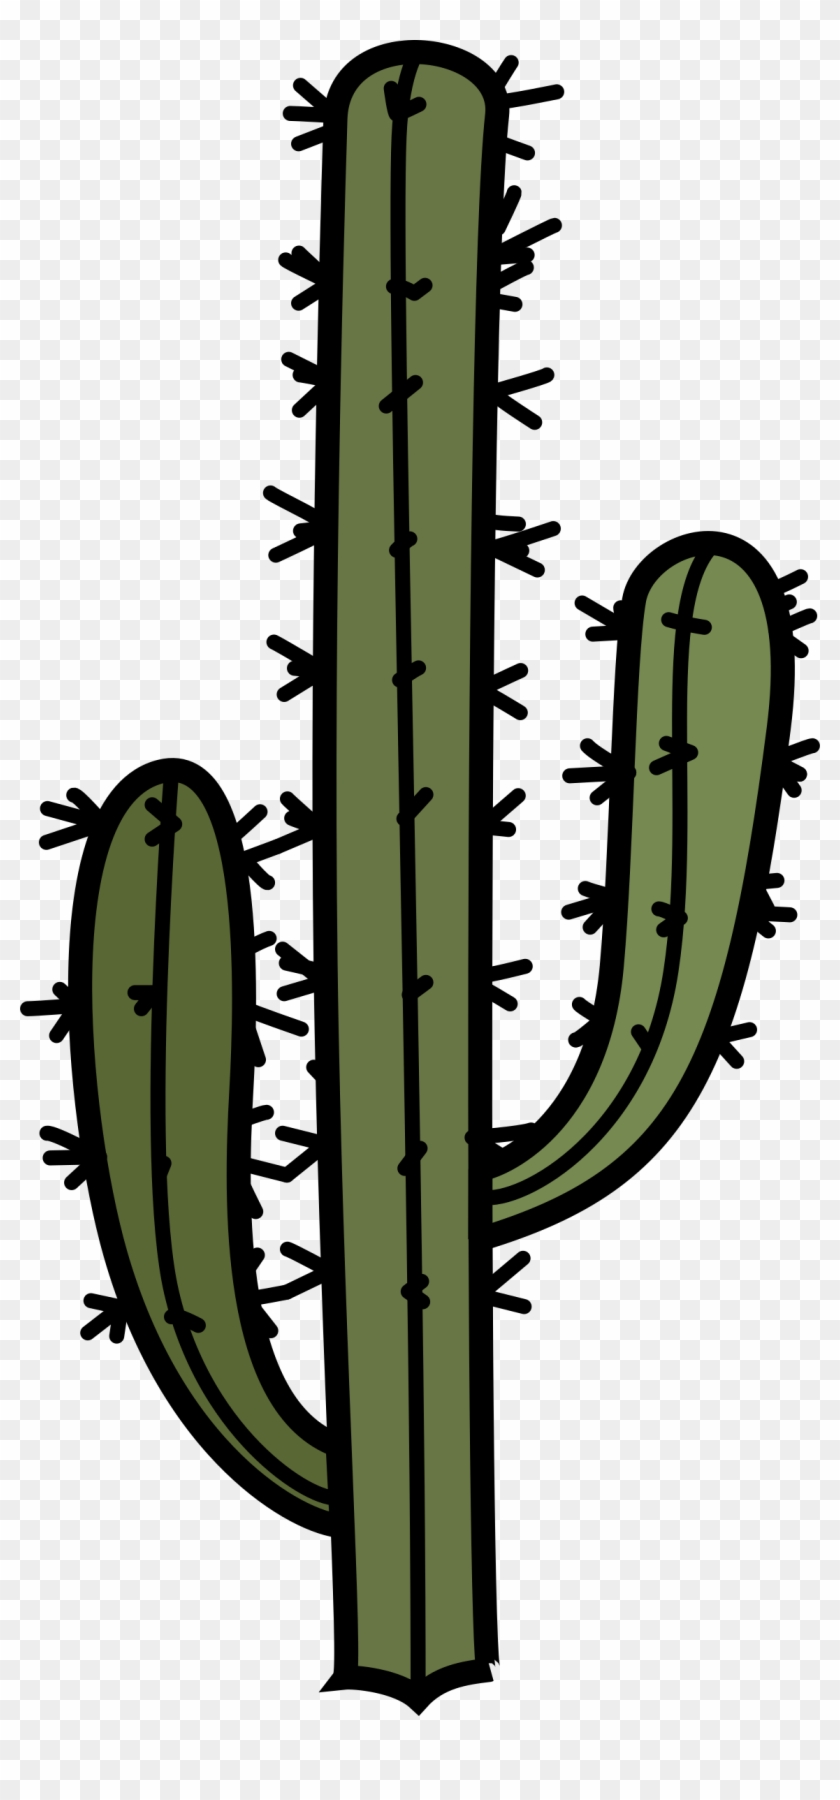 Cactus With Arms - Portable Network Graphics #184948